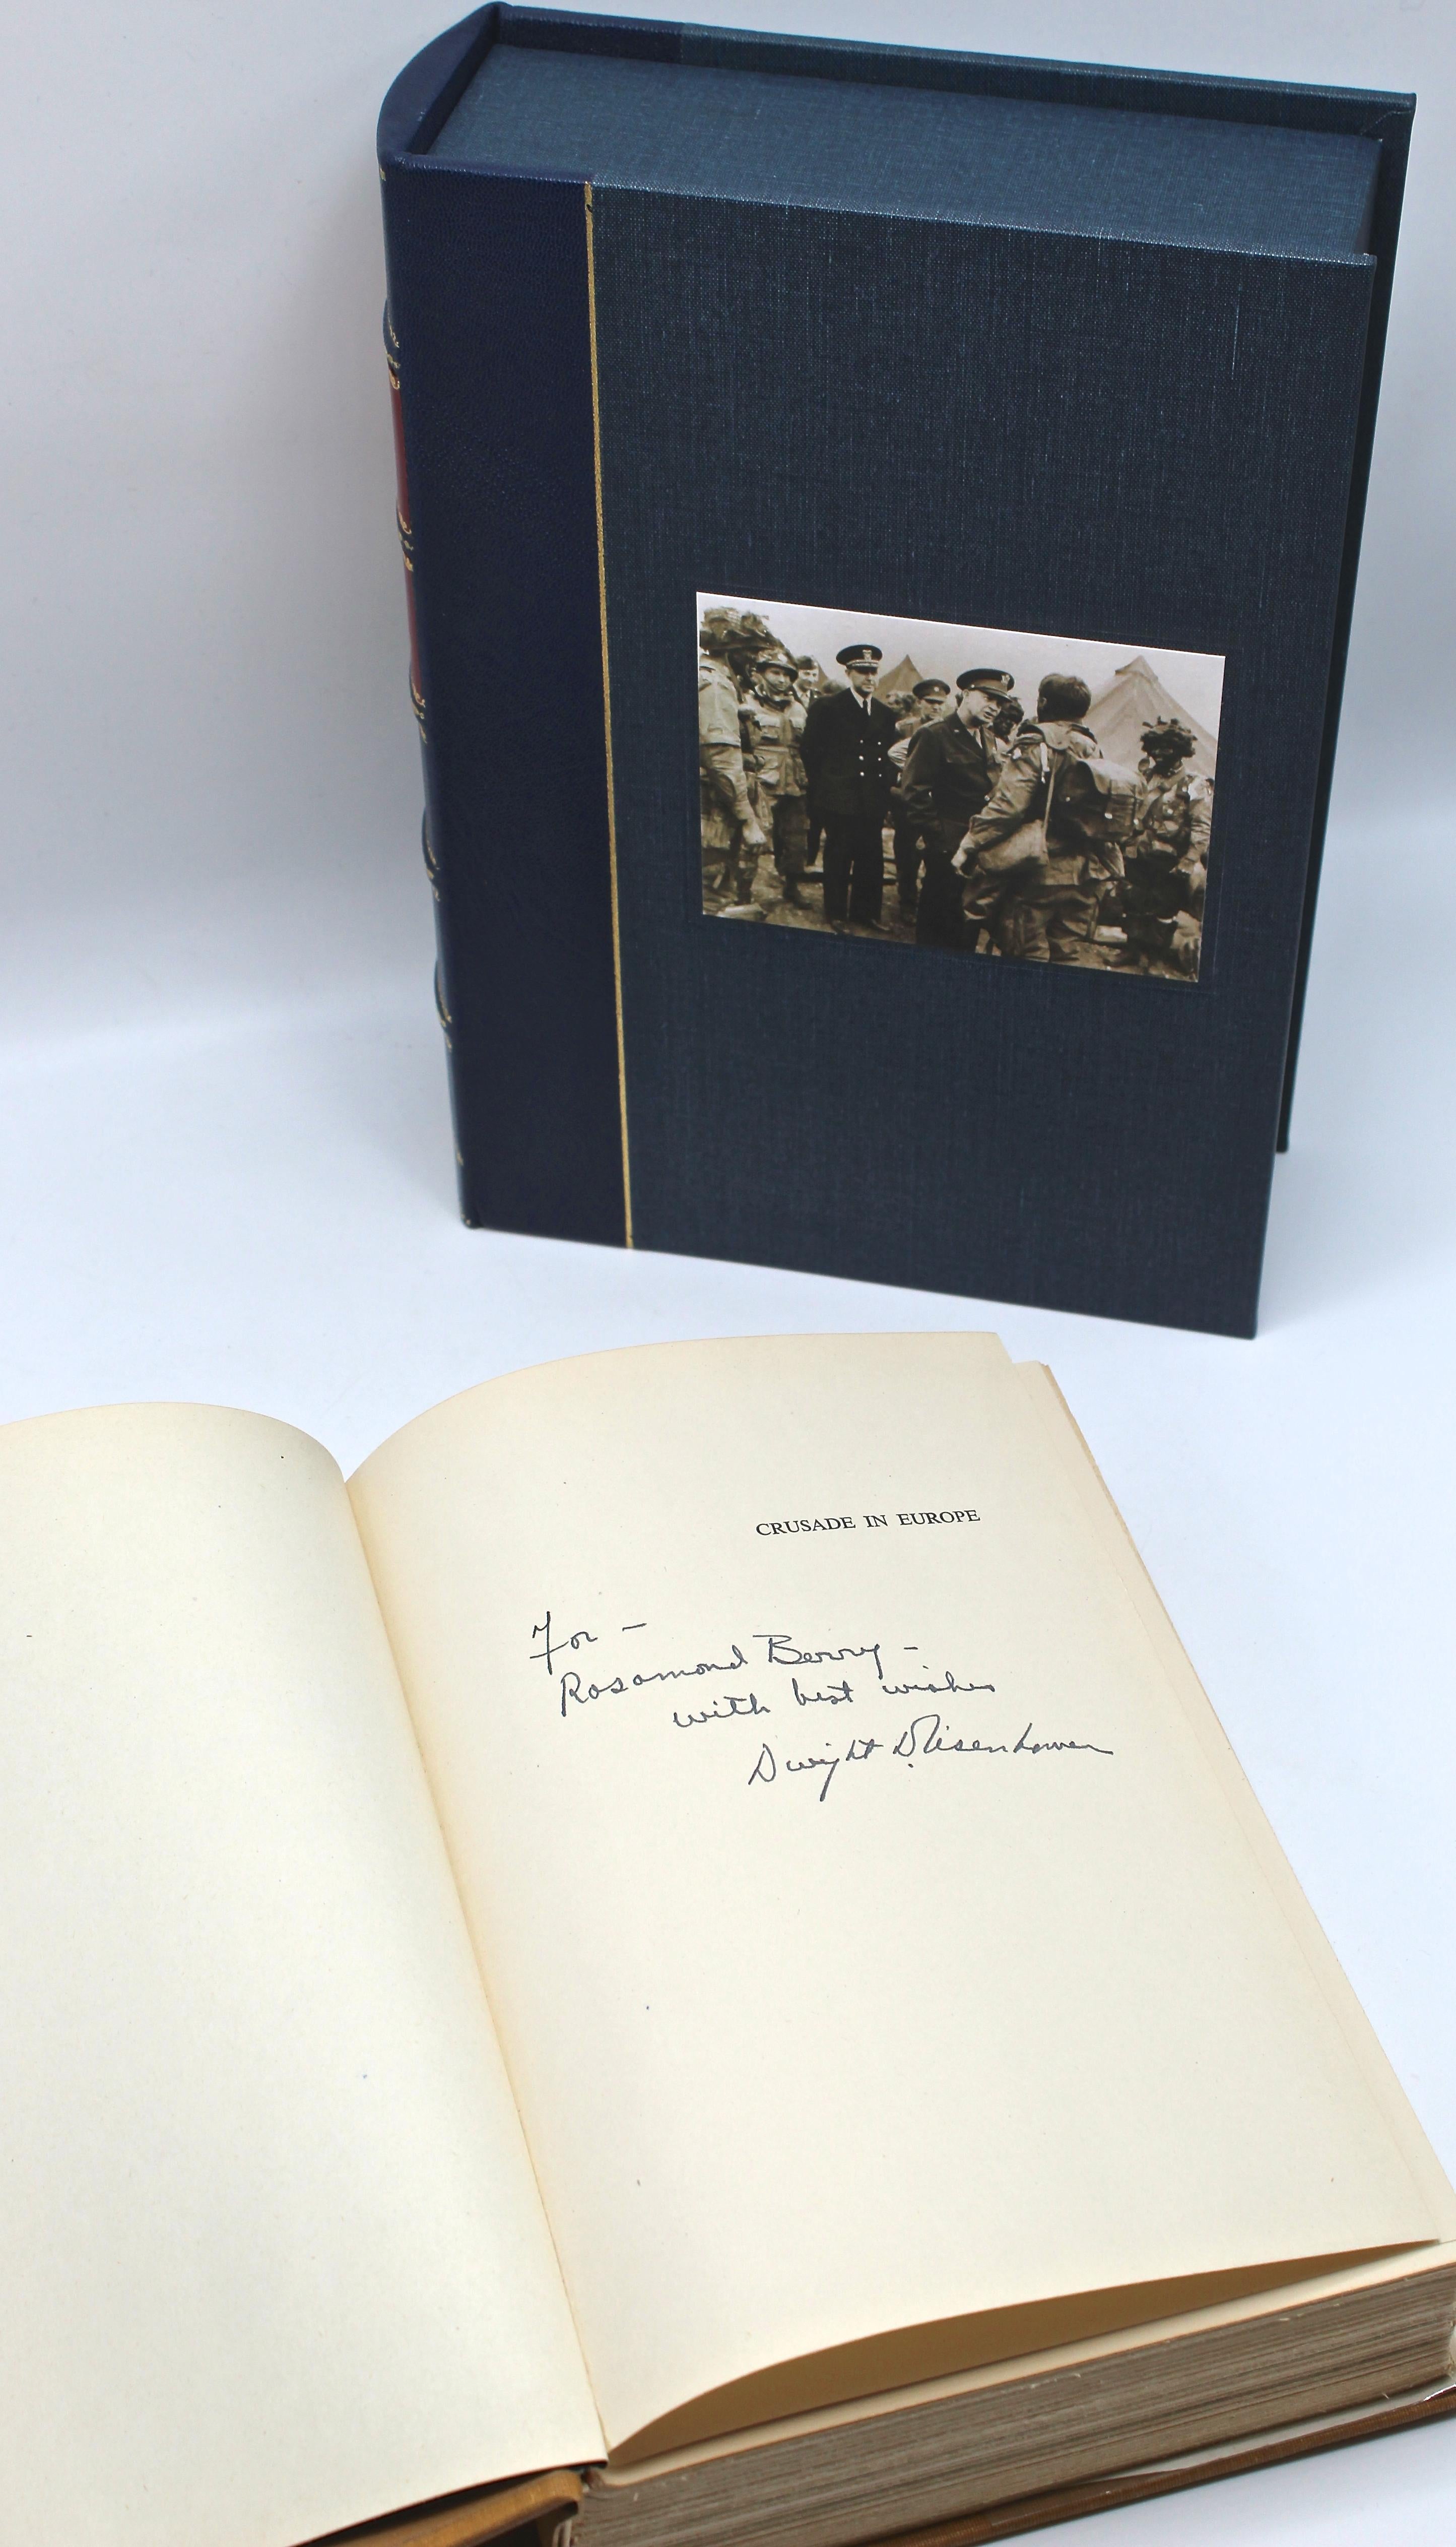 Eisenhower, Dwight D. Crusade in Europe: A personal account of World War II. New York: Doubleday & Co., 1948. First edition signed by Eisenhower. Original dust jacket and housed in a custom clamshell.

This first edition of Dwight D. Eisenhower’s